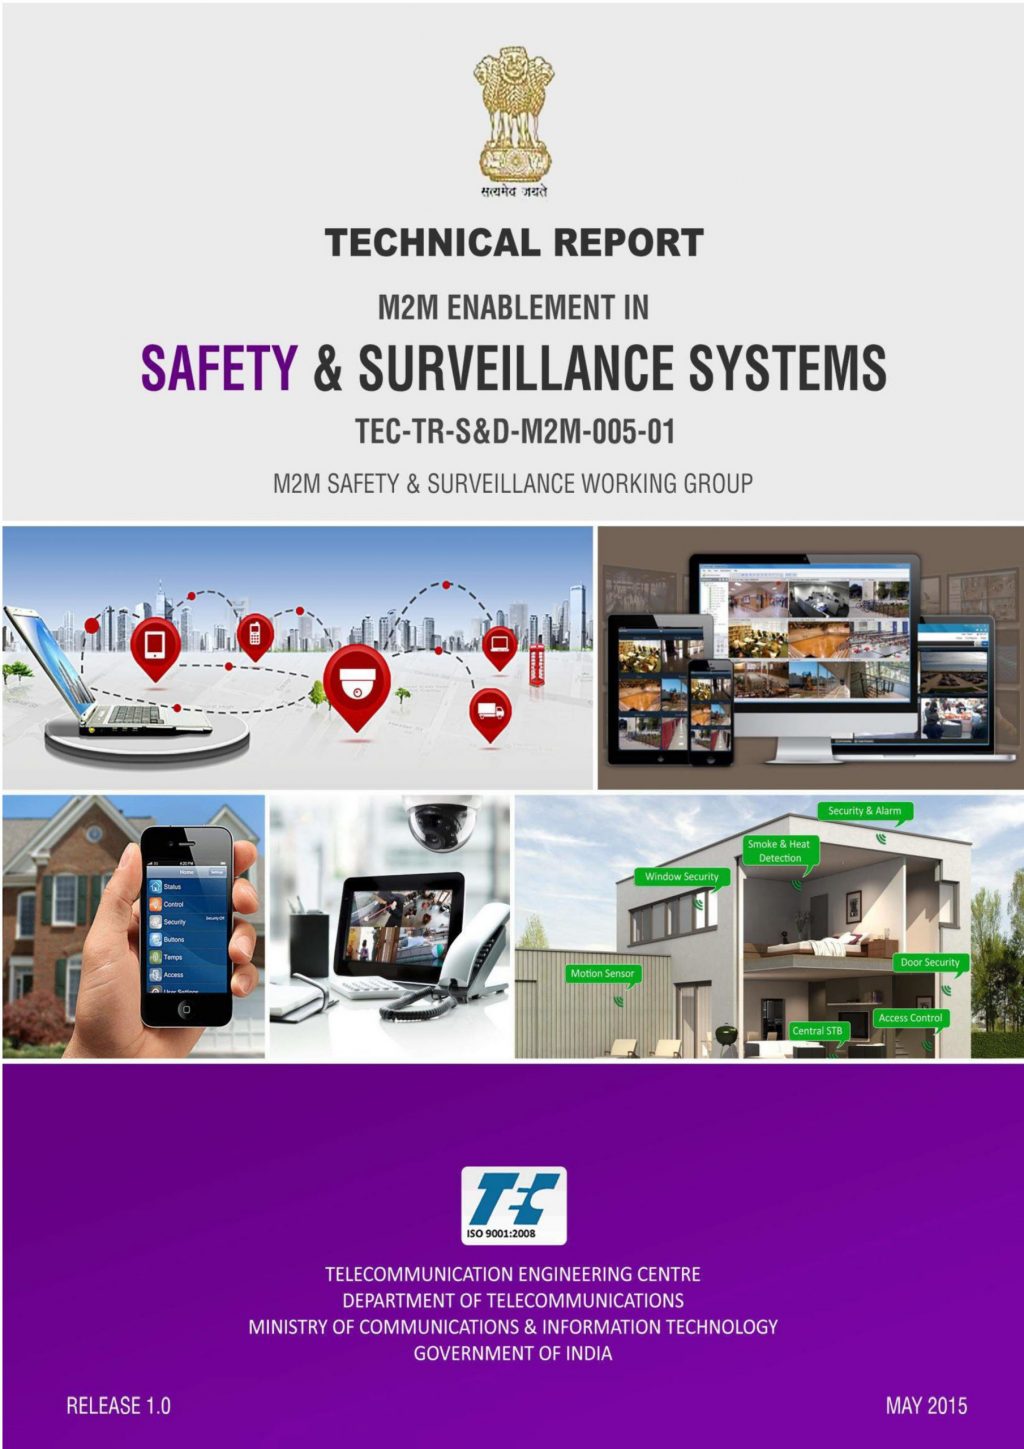 Technical report on Safety and surveillance